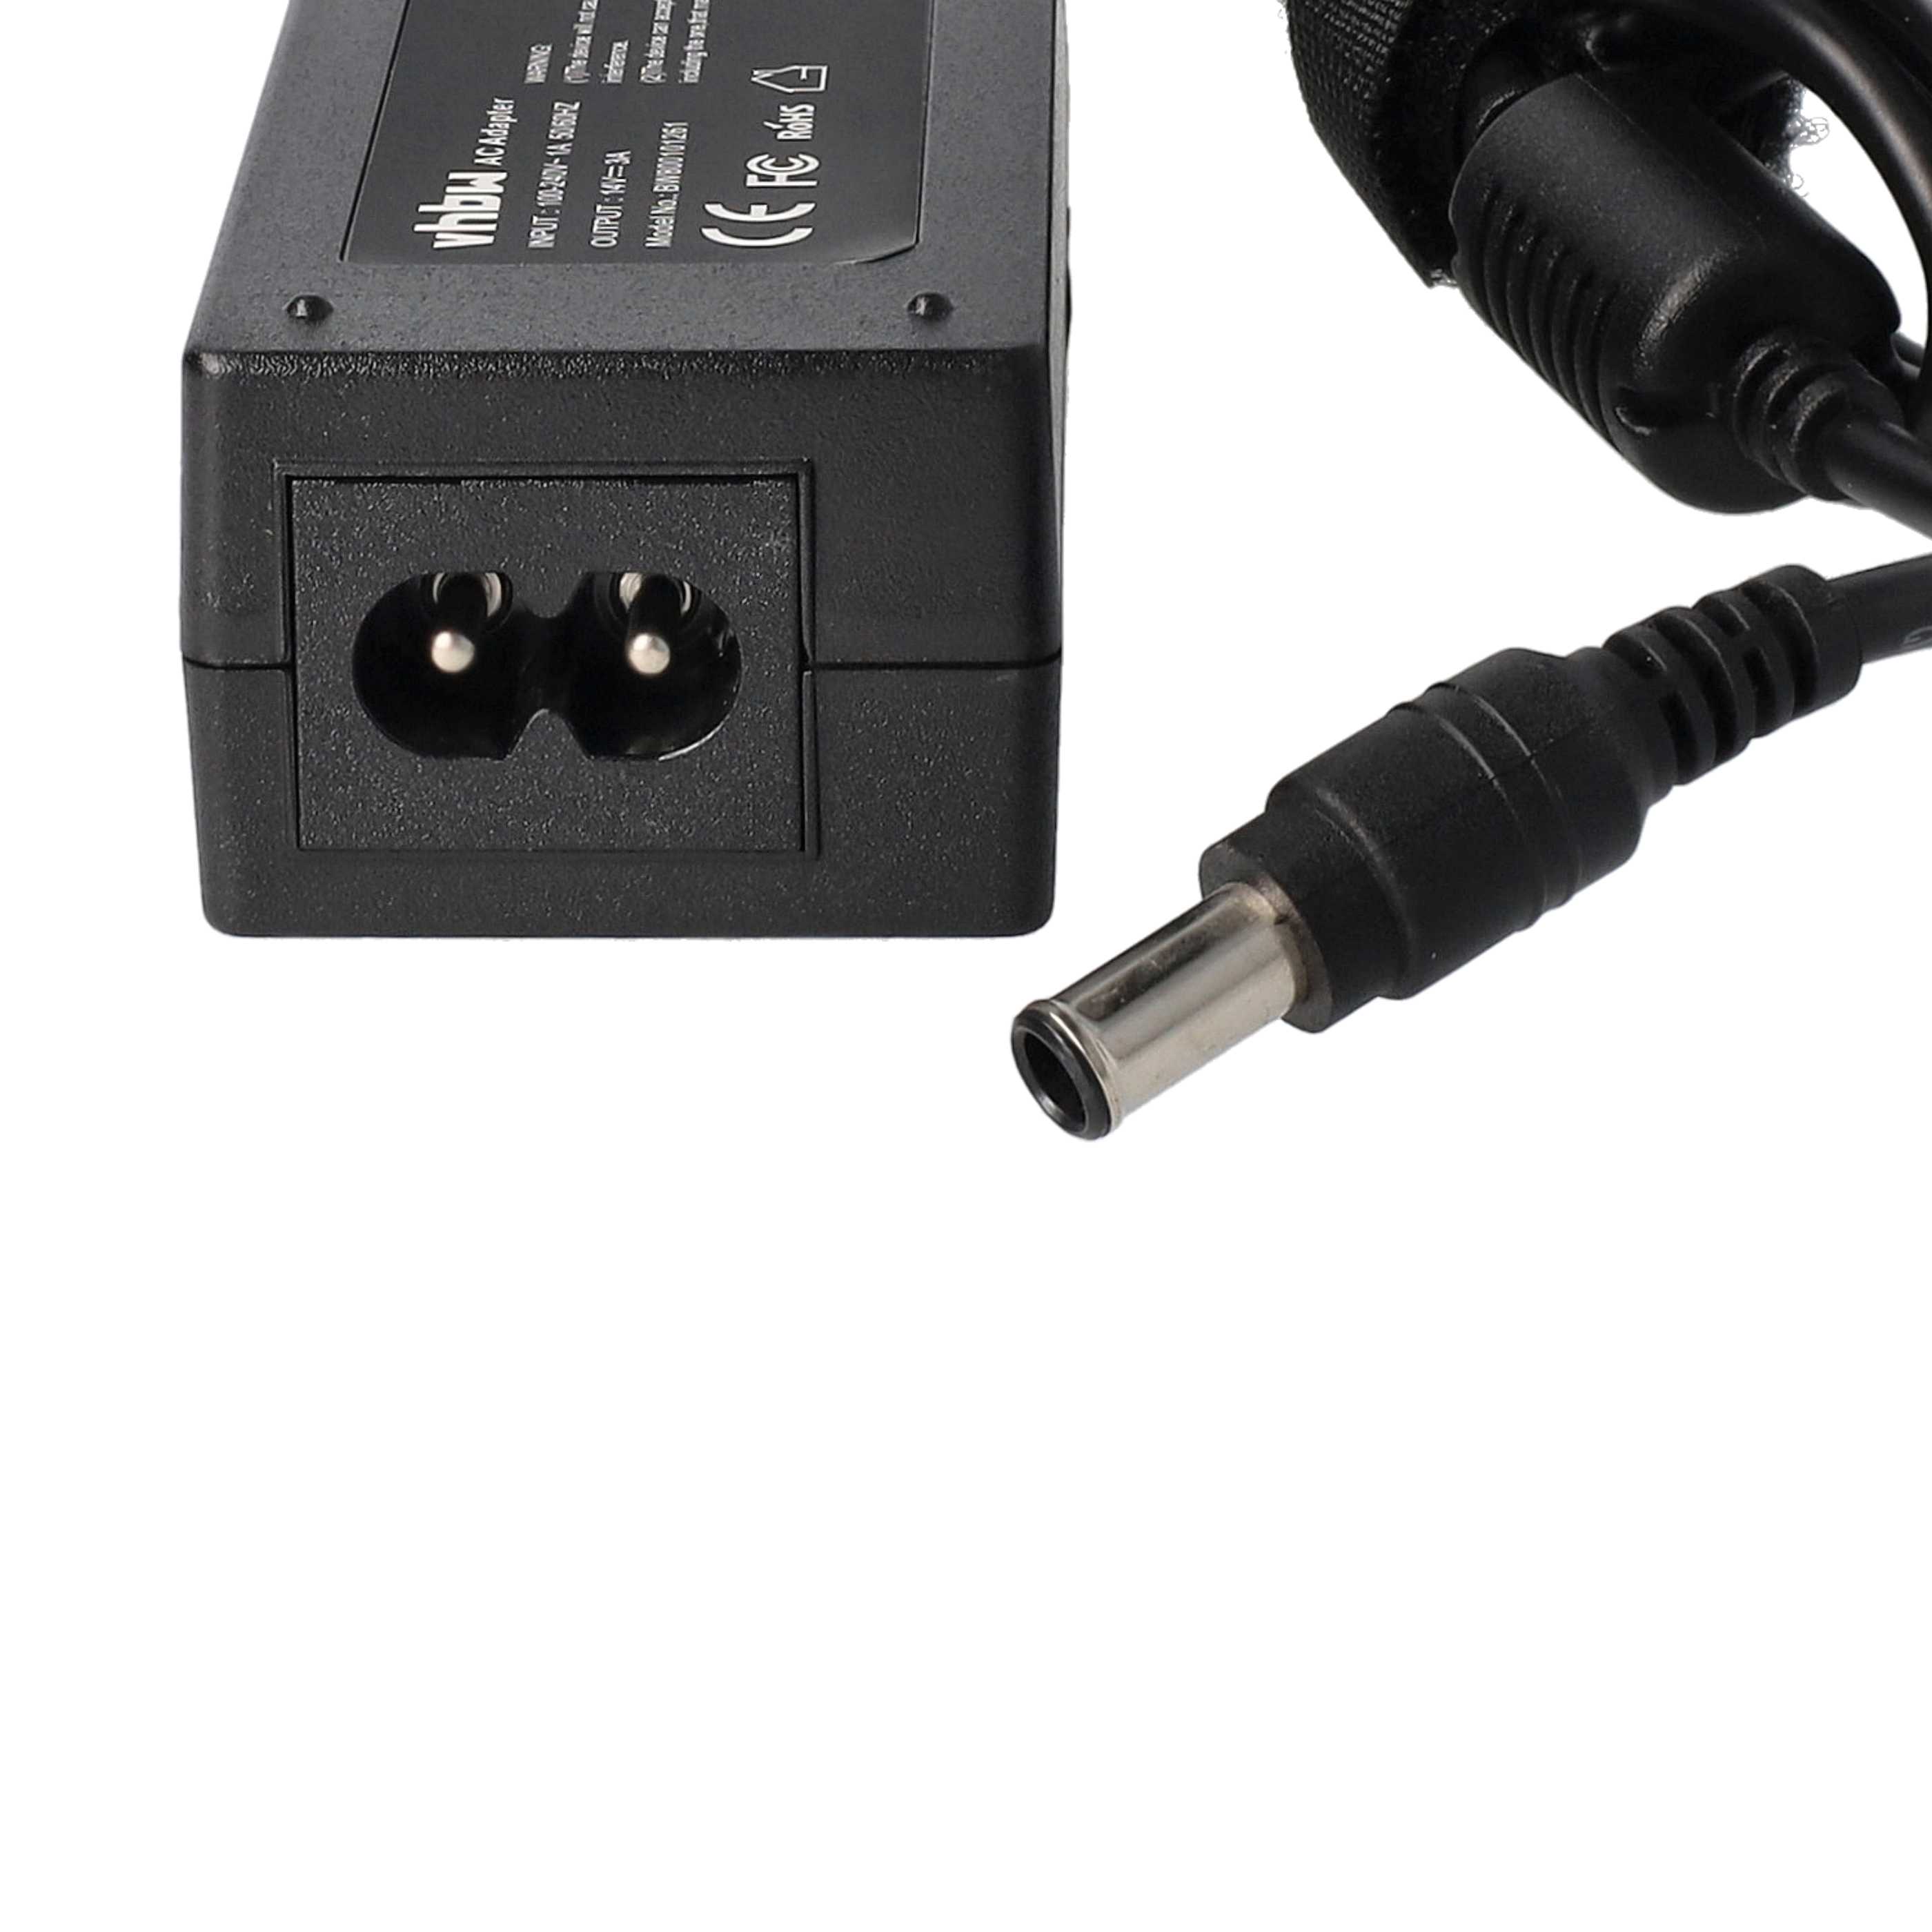 Mains Power Adapter replaces Samsung AD-3014, AD-3014B, 14030GPCN, A3014VE for IBMNotebook etc. - 200 cm, 42 W